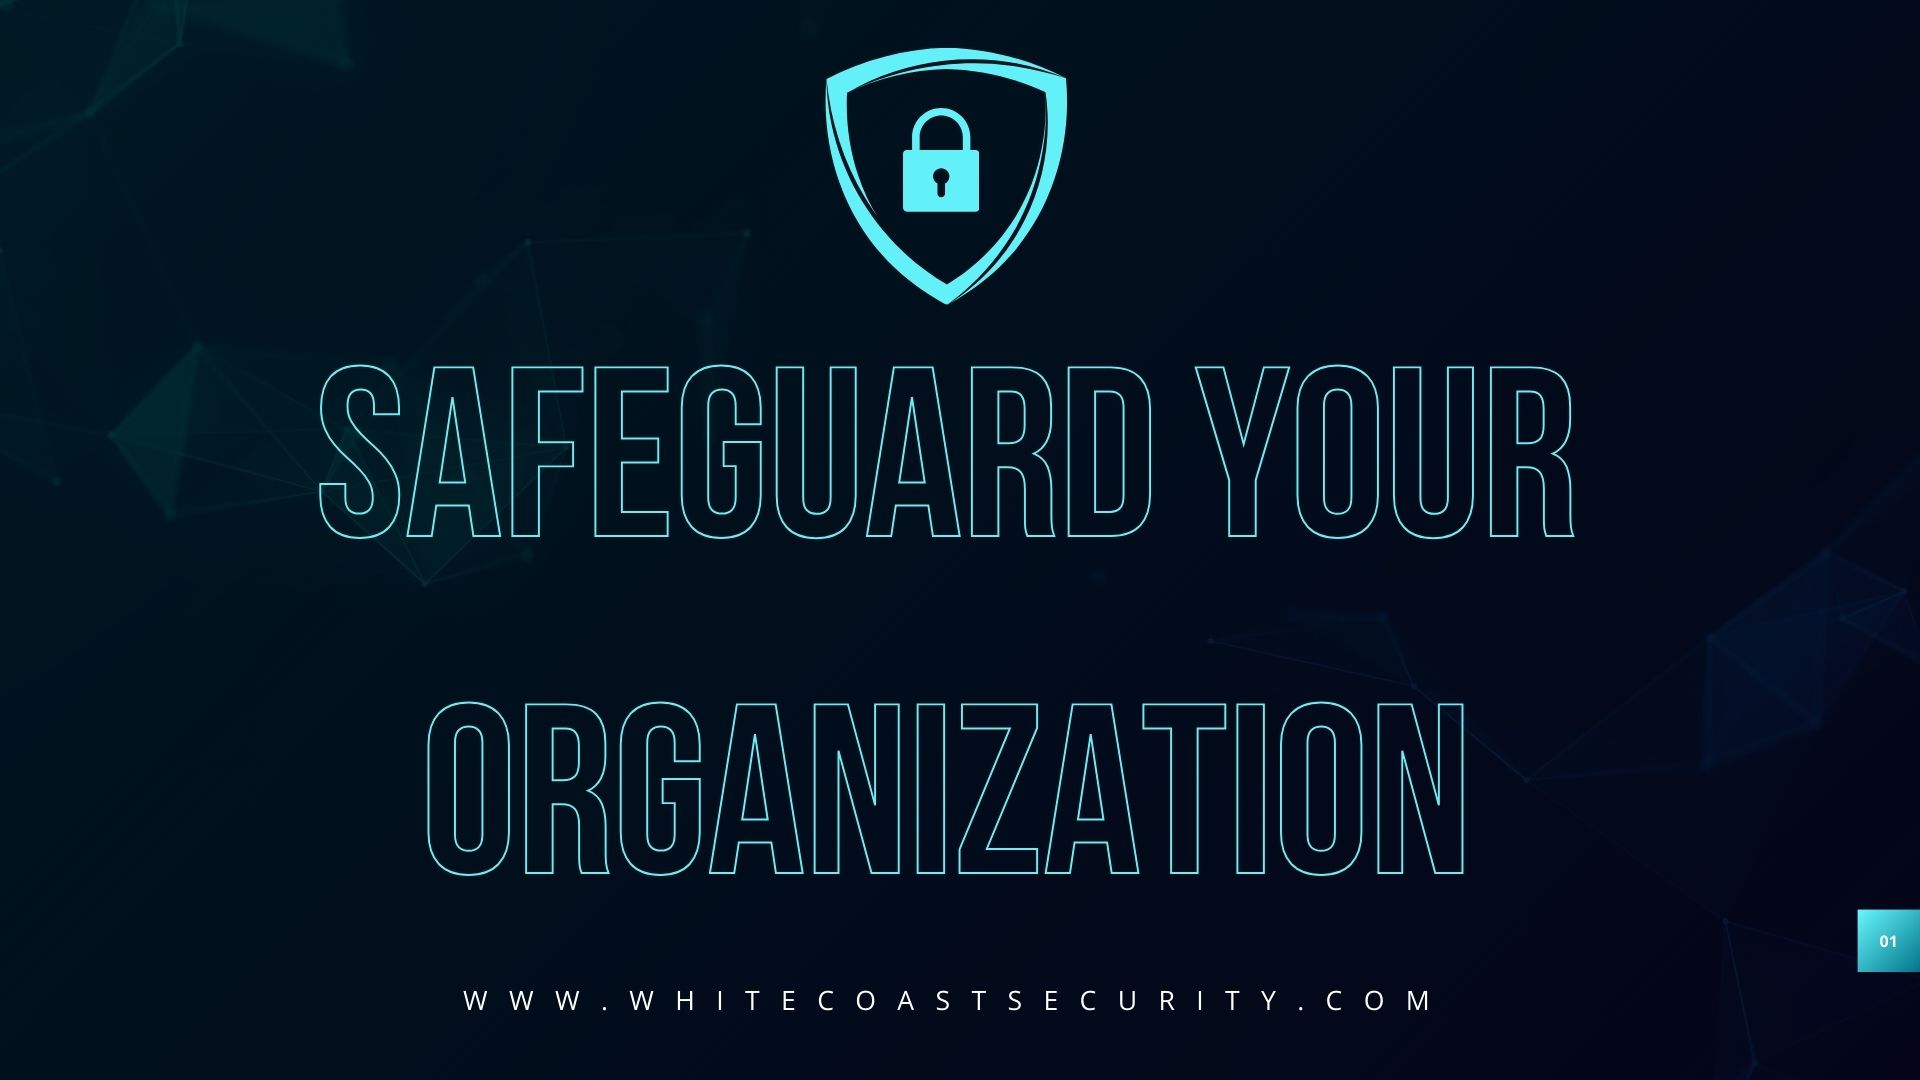 Securing Your Organization